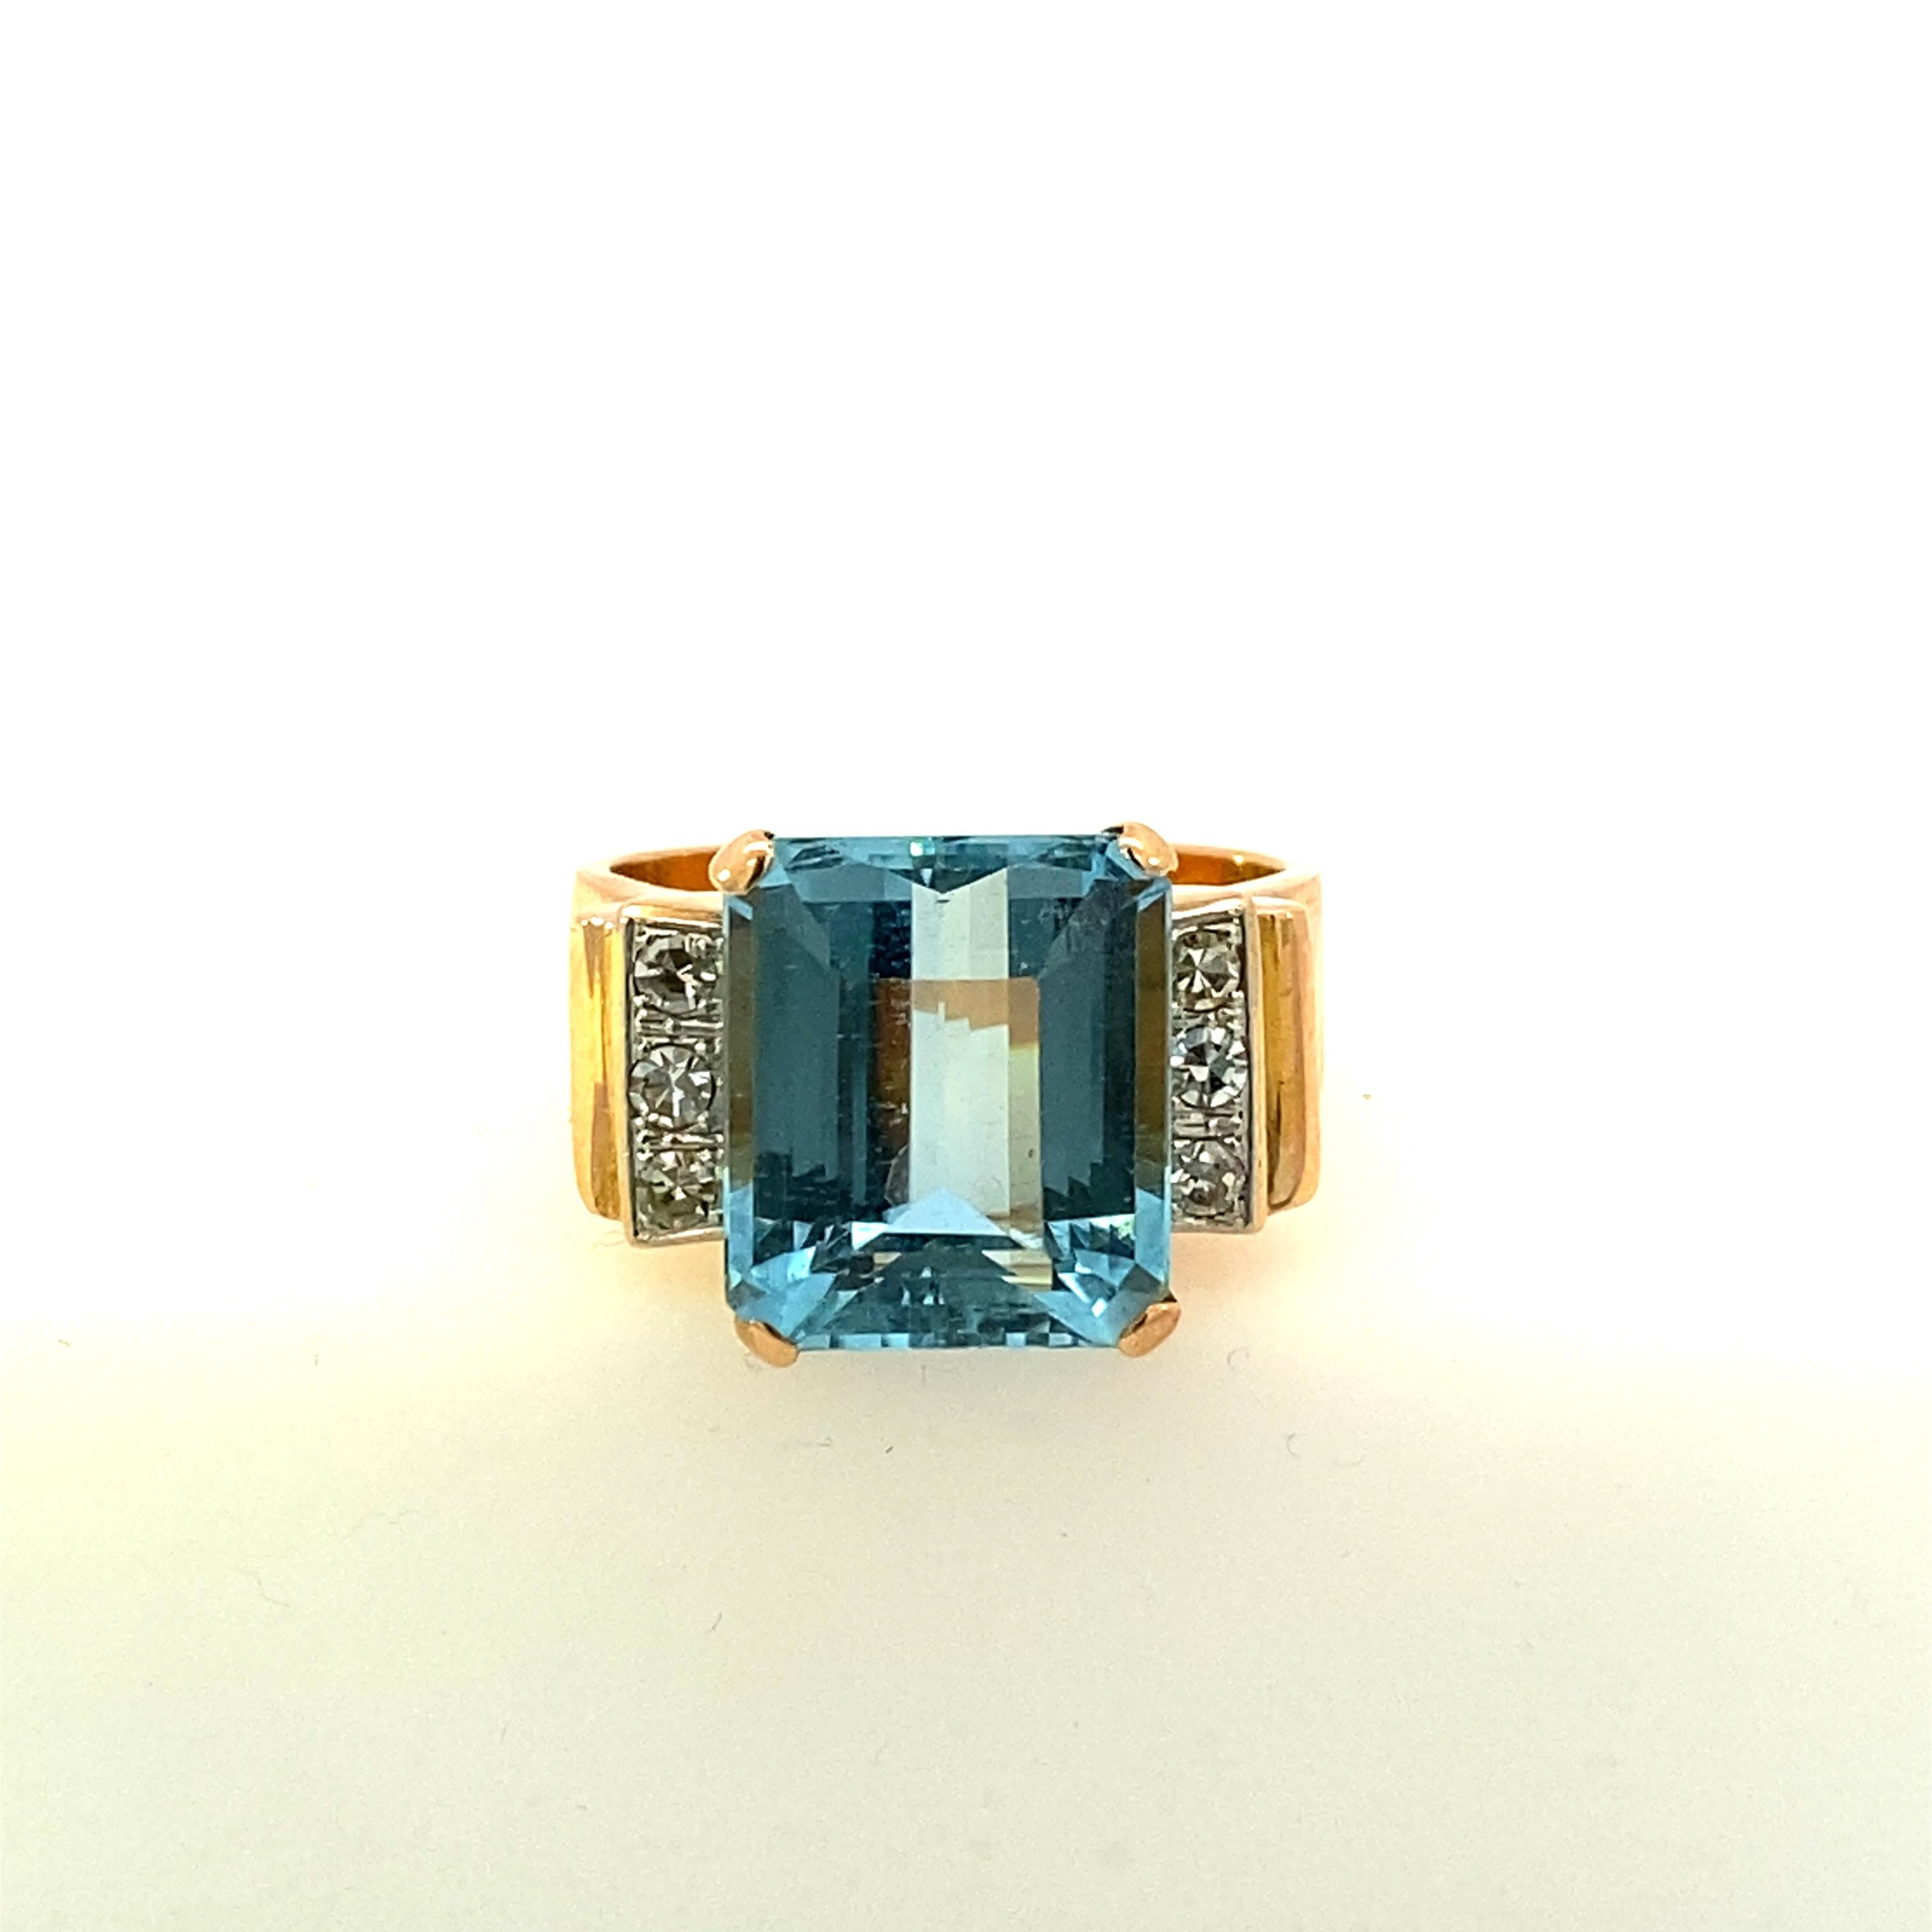 14k rose gold Art Nouveau estate ring with approximately 12 carat aquamarine and .36 carat total weight single cut diamonds. Size 9